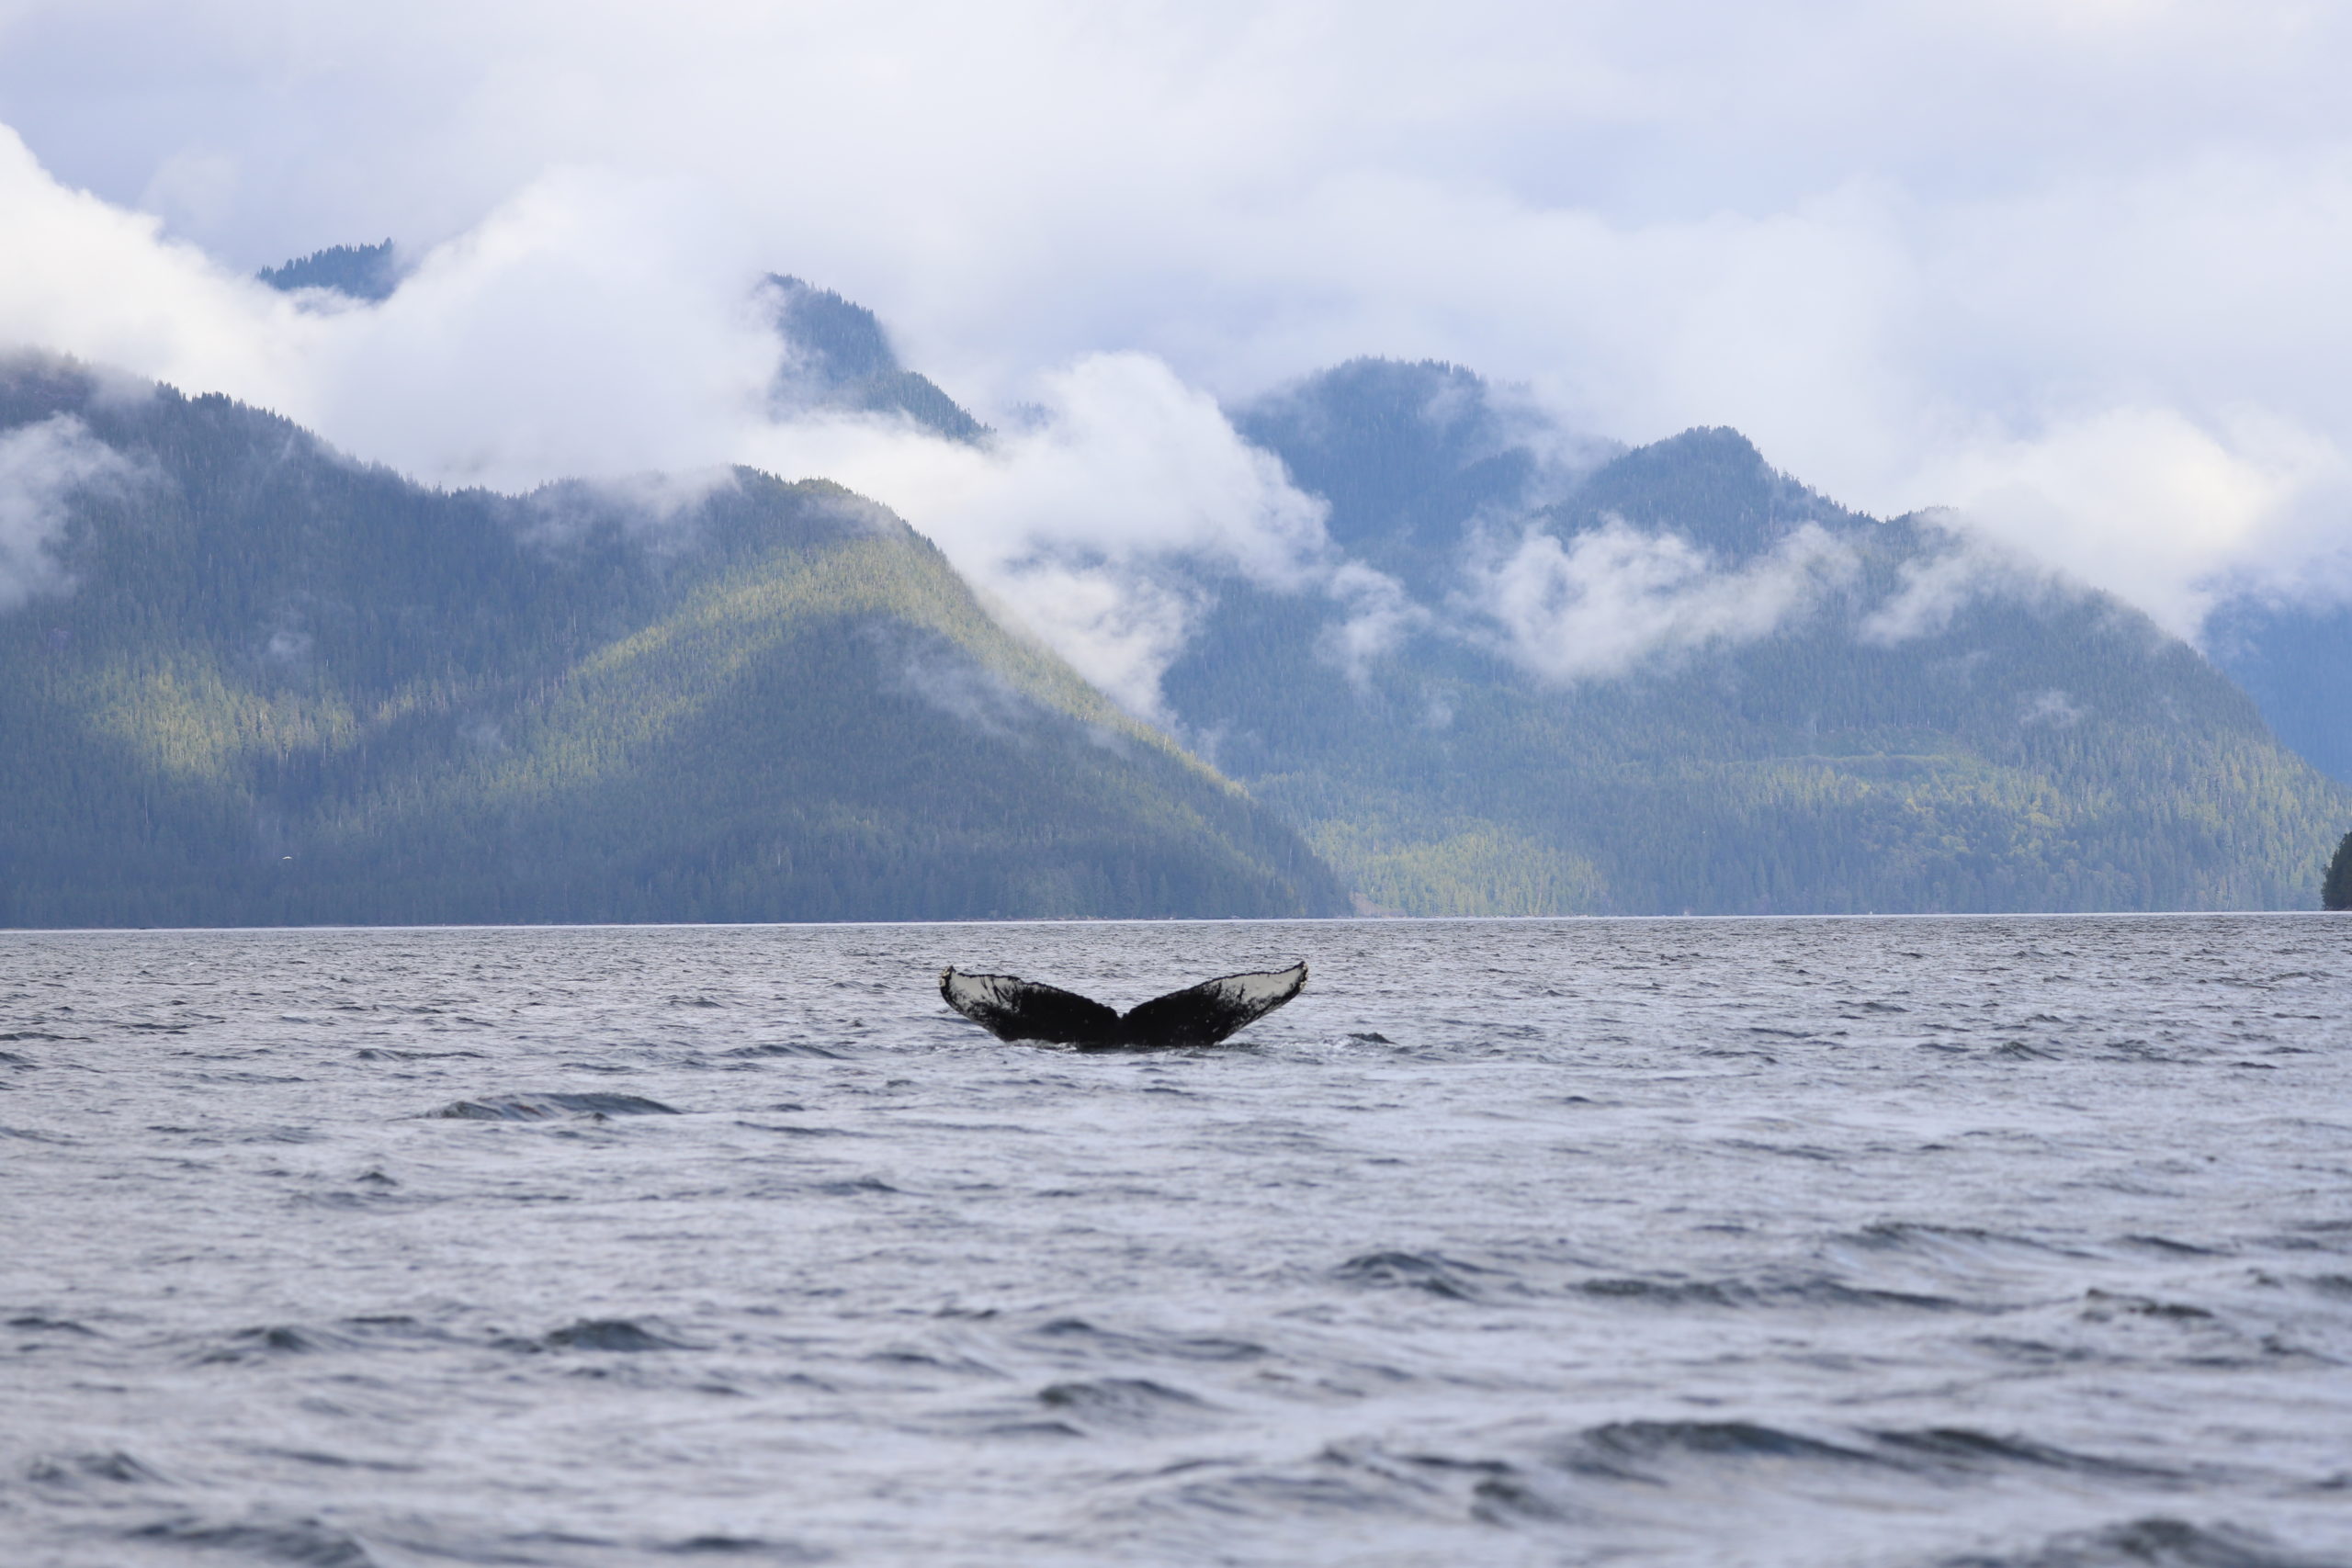 Humpback whale tail visible from the water.